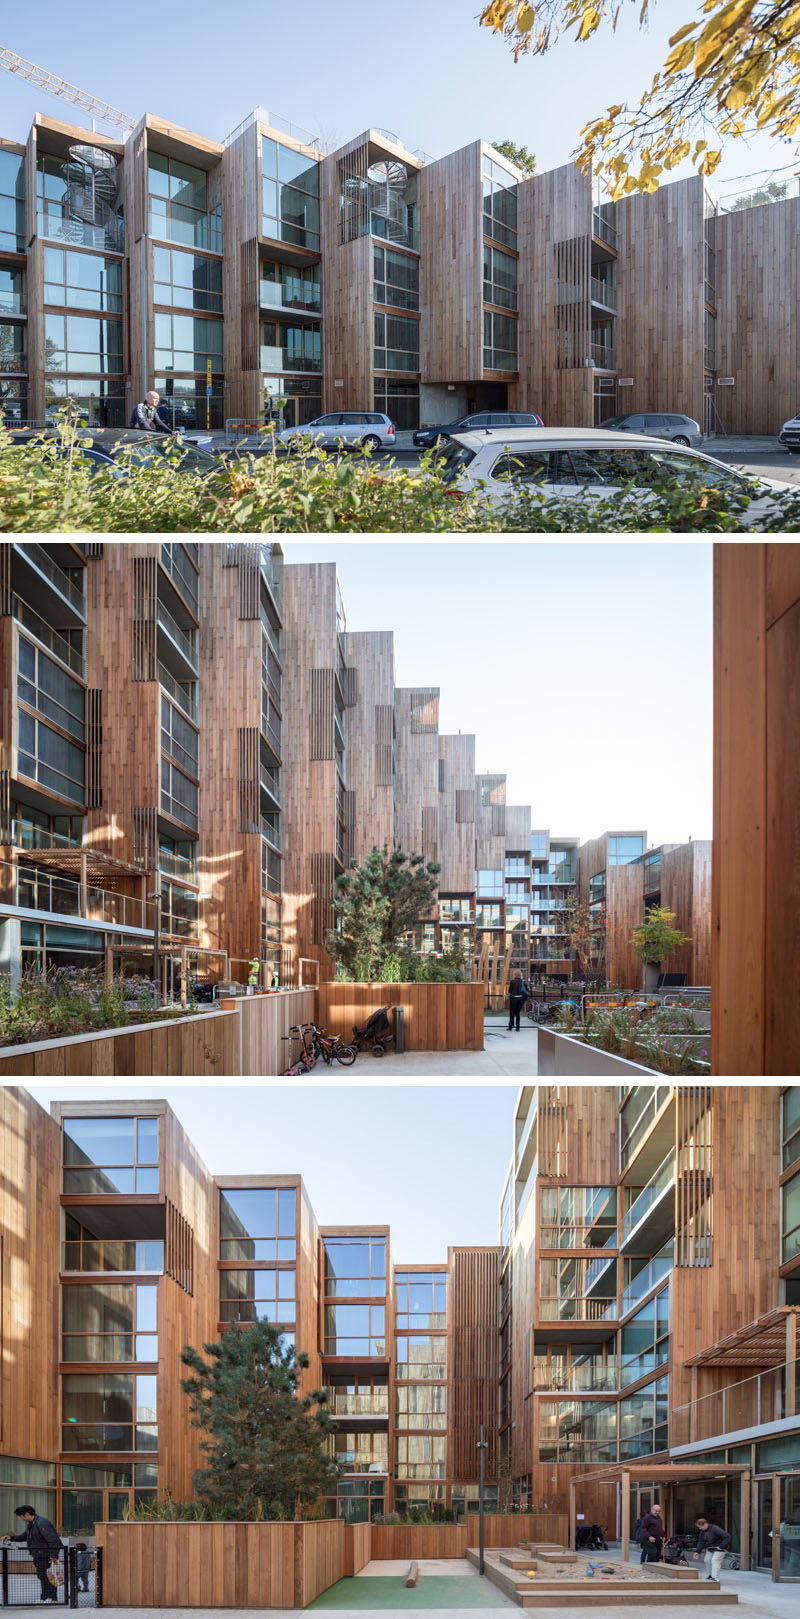 The edge of the modern building which is closest to the street, has been pushed down, creating a softer and more welcoming edge for those walking past. #BuildingDesign #ResidentialBuilding #WoodArchitecture